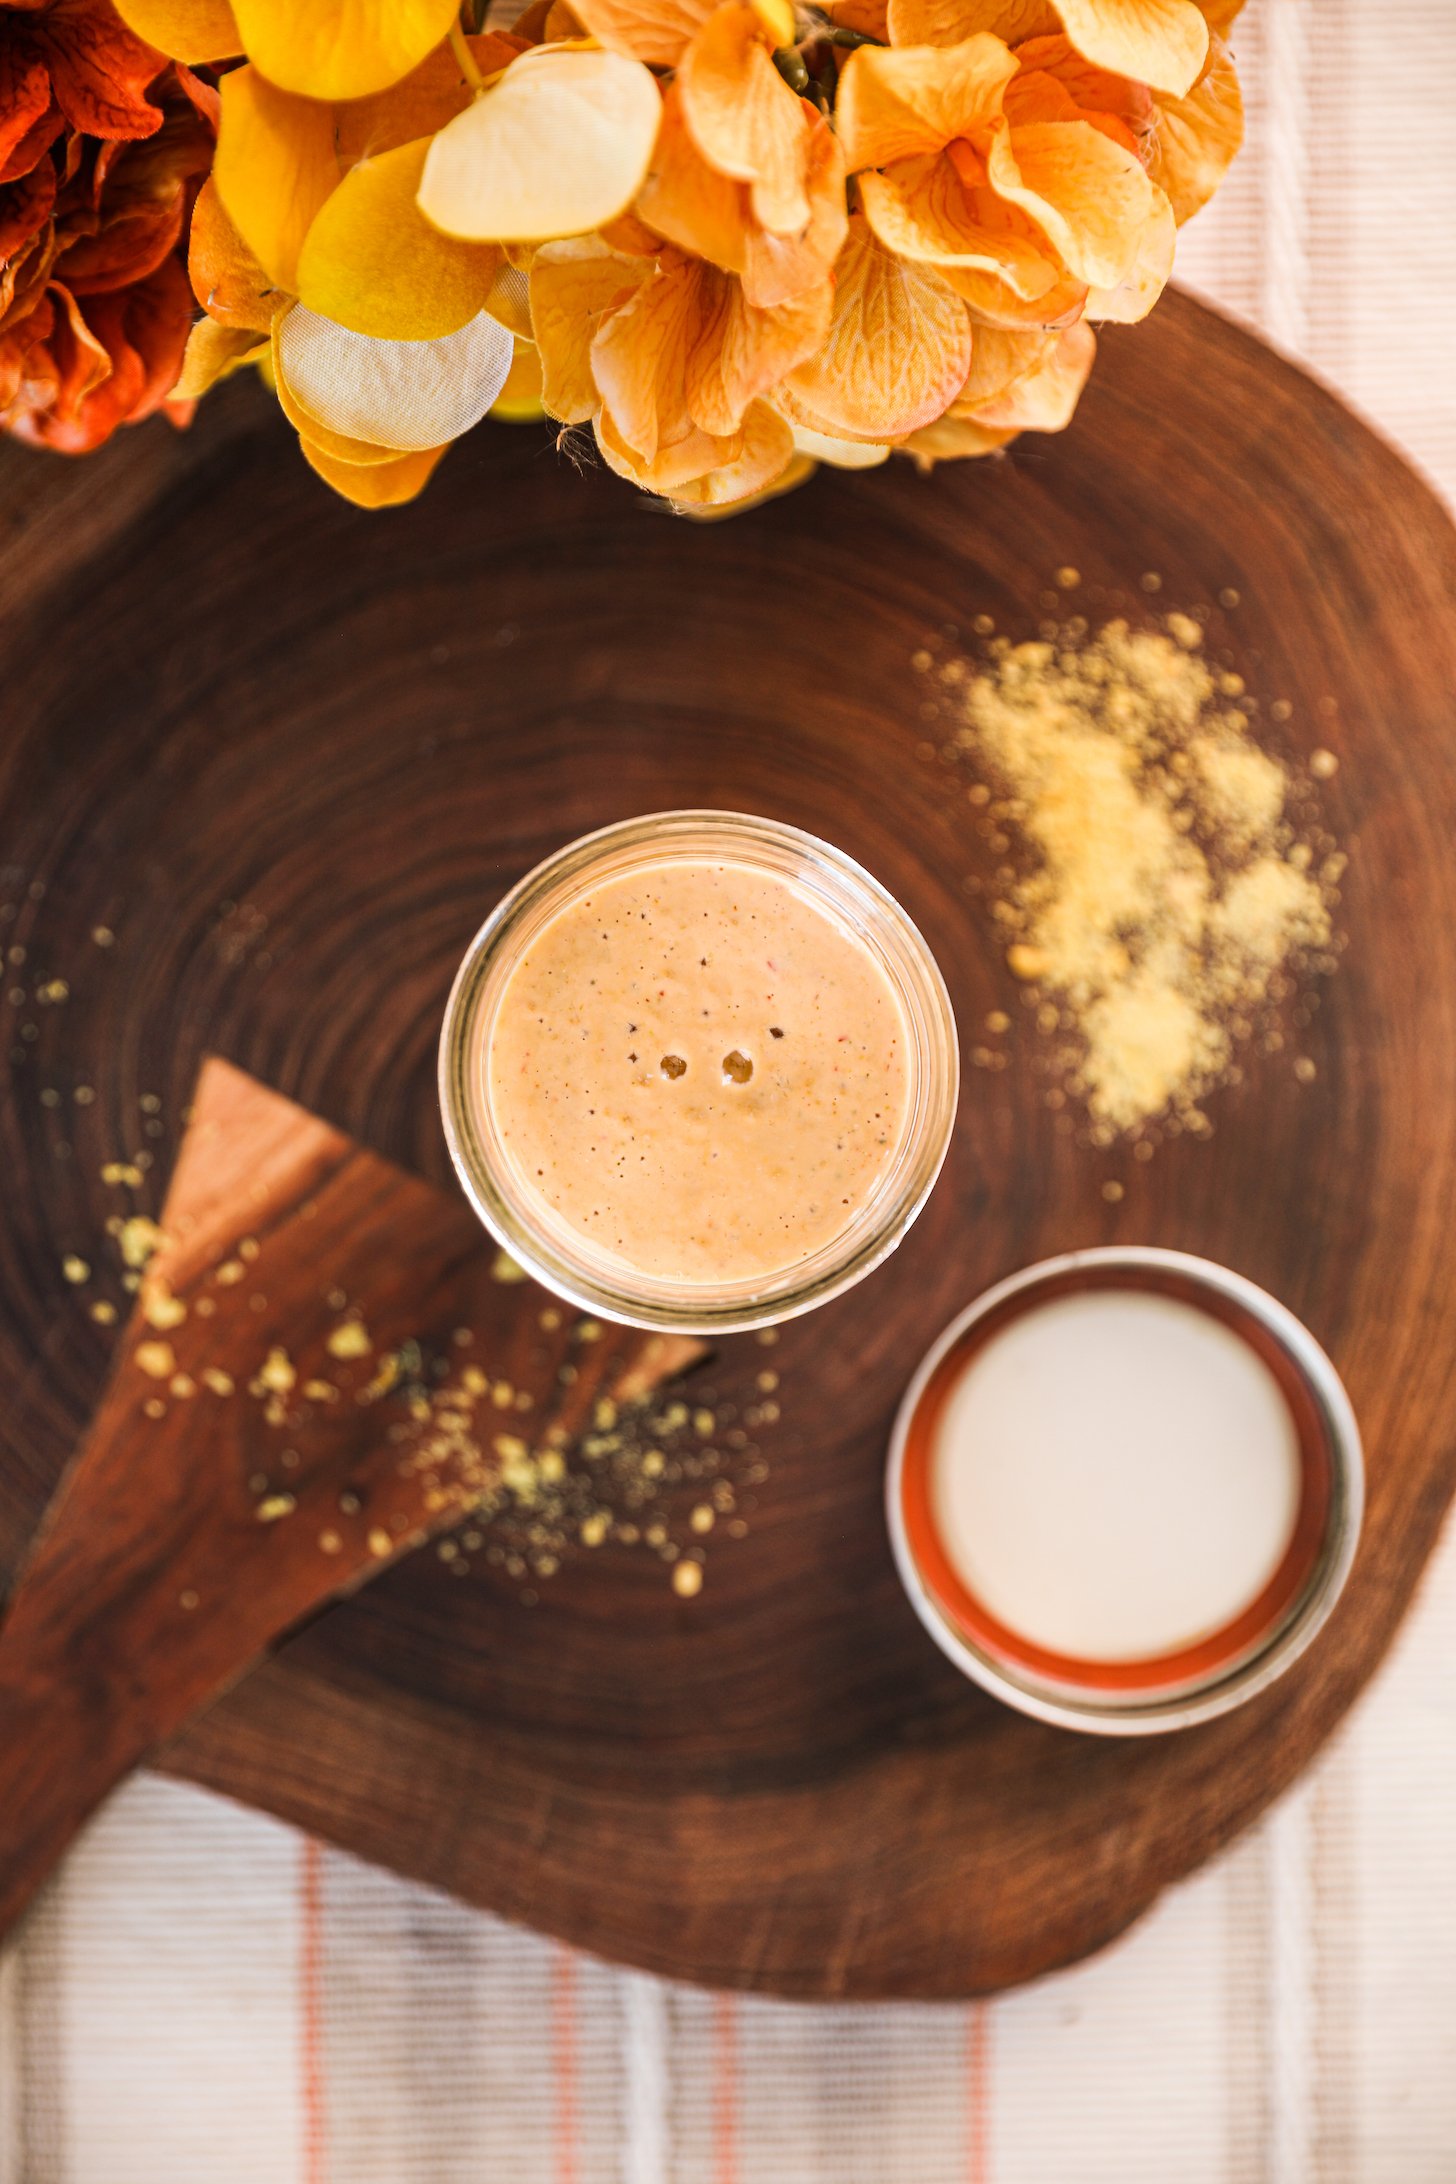 Top view of a mason jar of yellow sauce on a wooden board with sprinkles of a yellow powder.